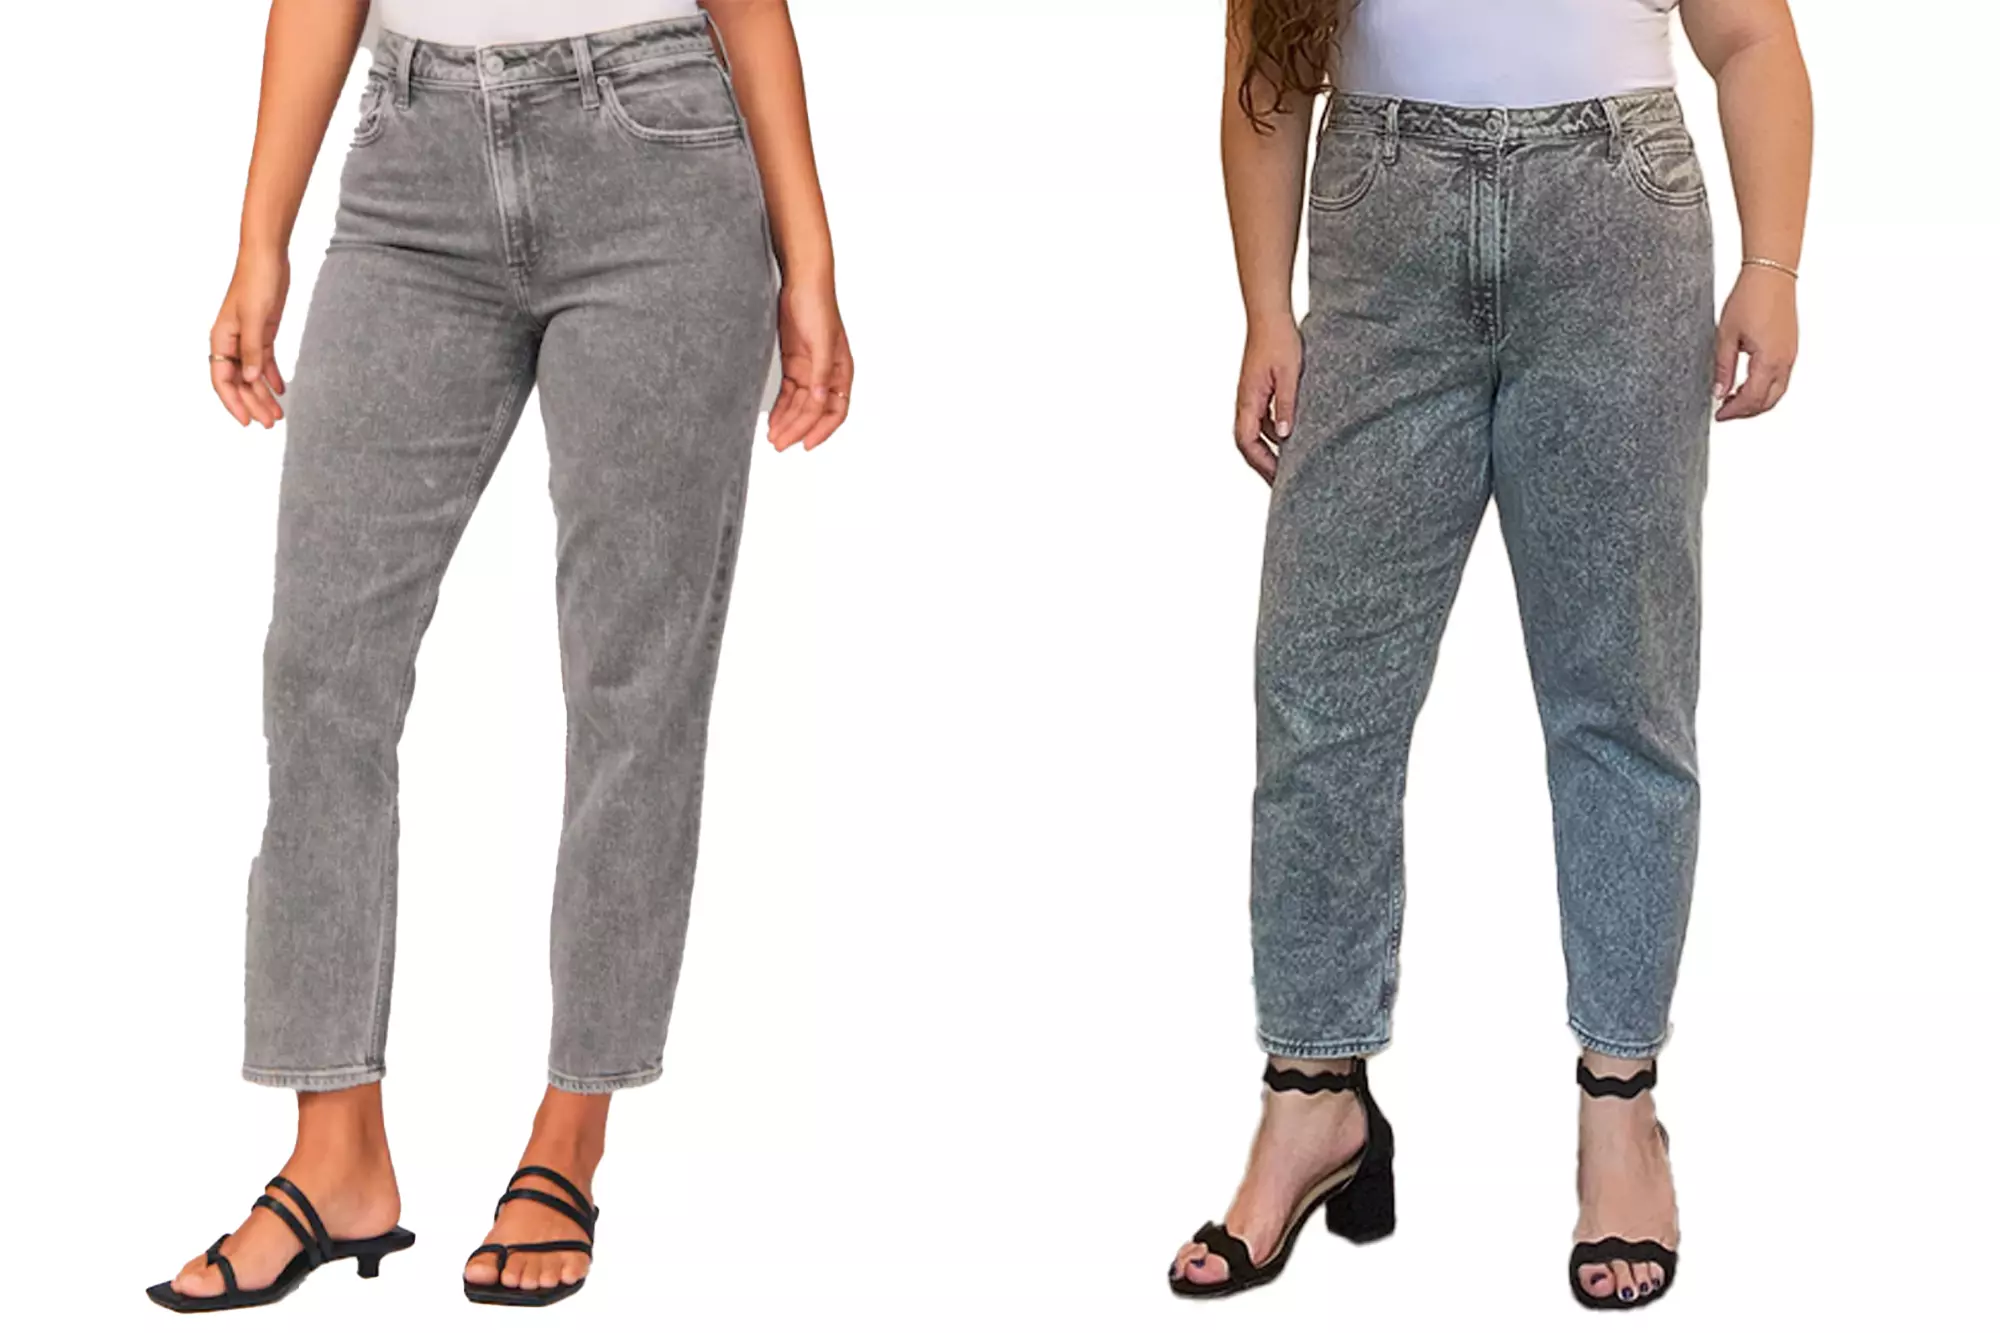 A side by side image of a model in gray jeans and a white tank top and Sophie Cannon in the same outfit and pose